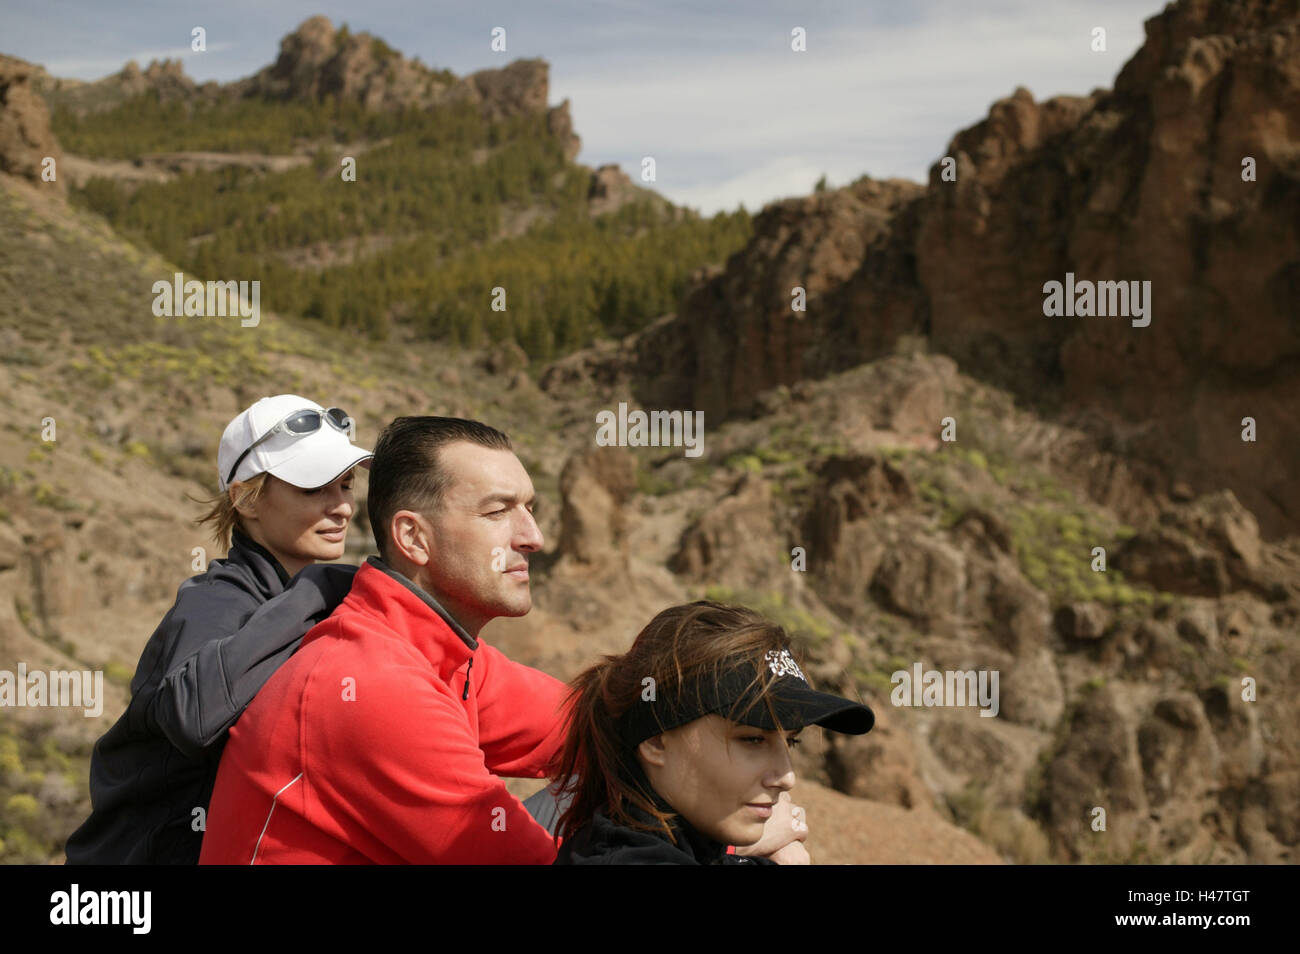 spain, mountain-hiking, tourists, sitting, hikers, pause, nature, portrait Stock Photo